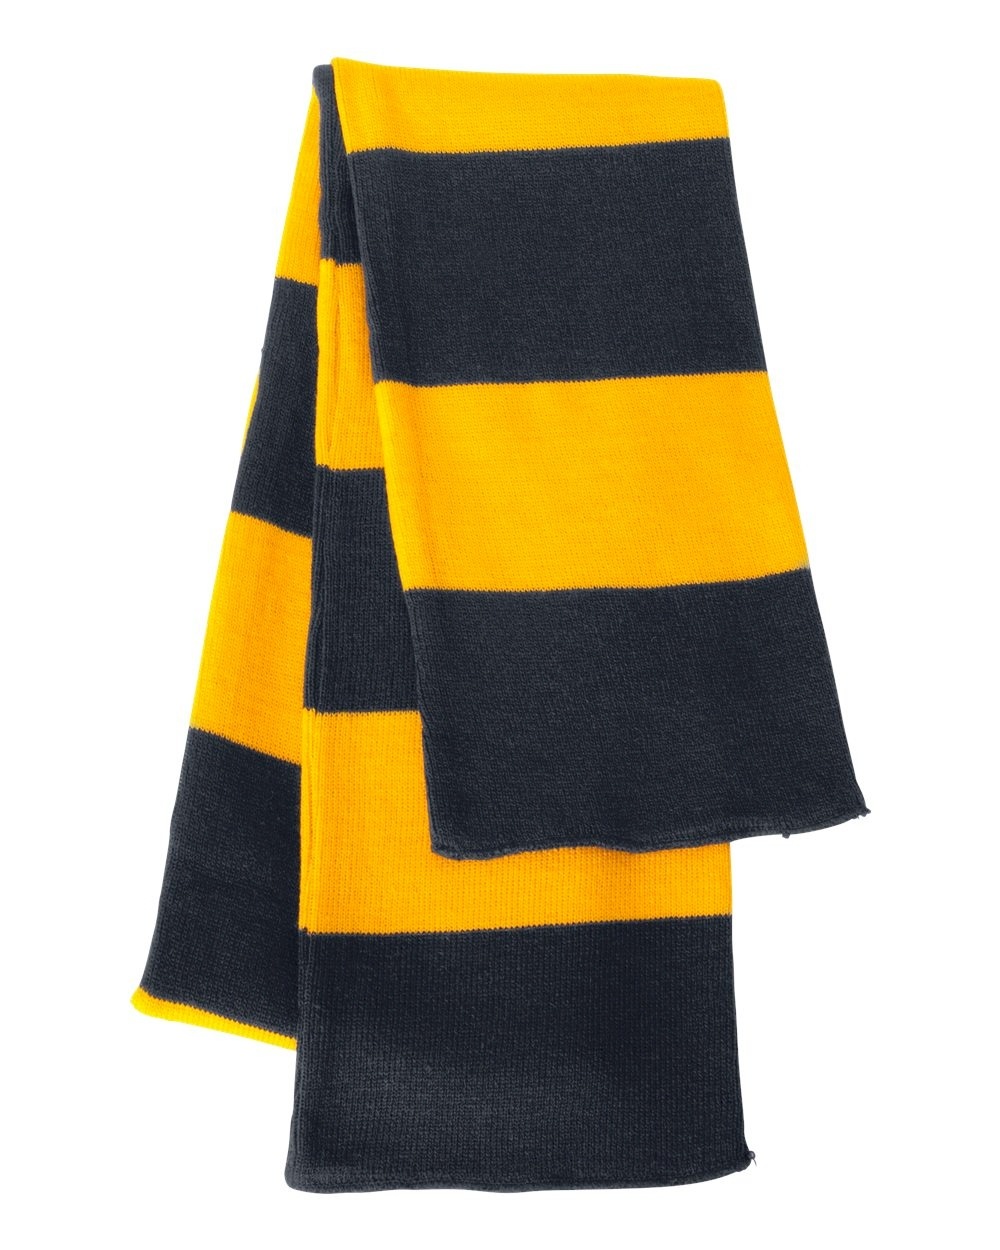 Rugby Striped Knit Scarf Embroidery Blanks - NAVY/GOLD